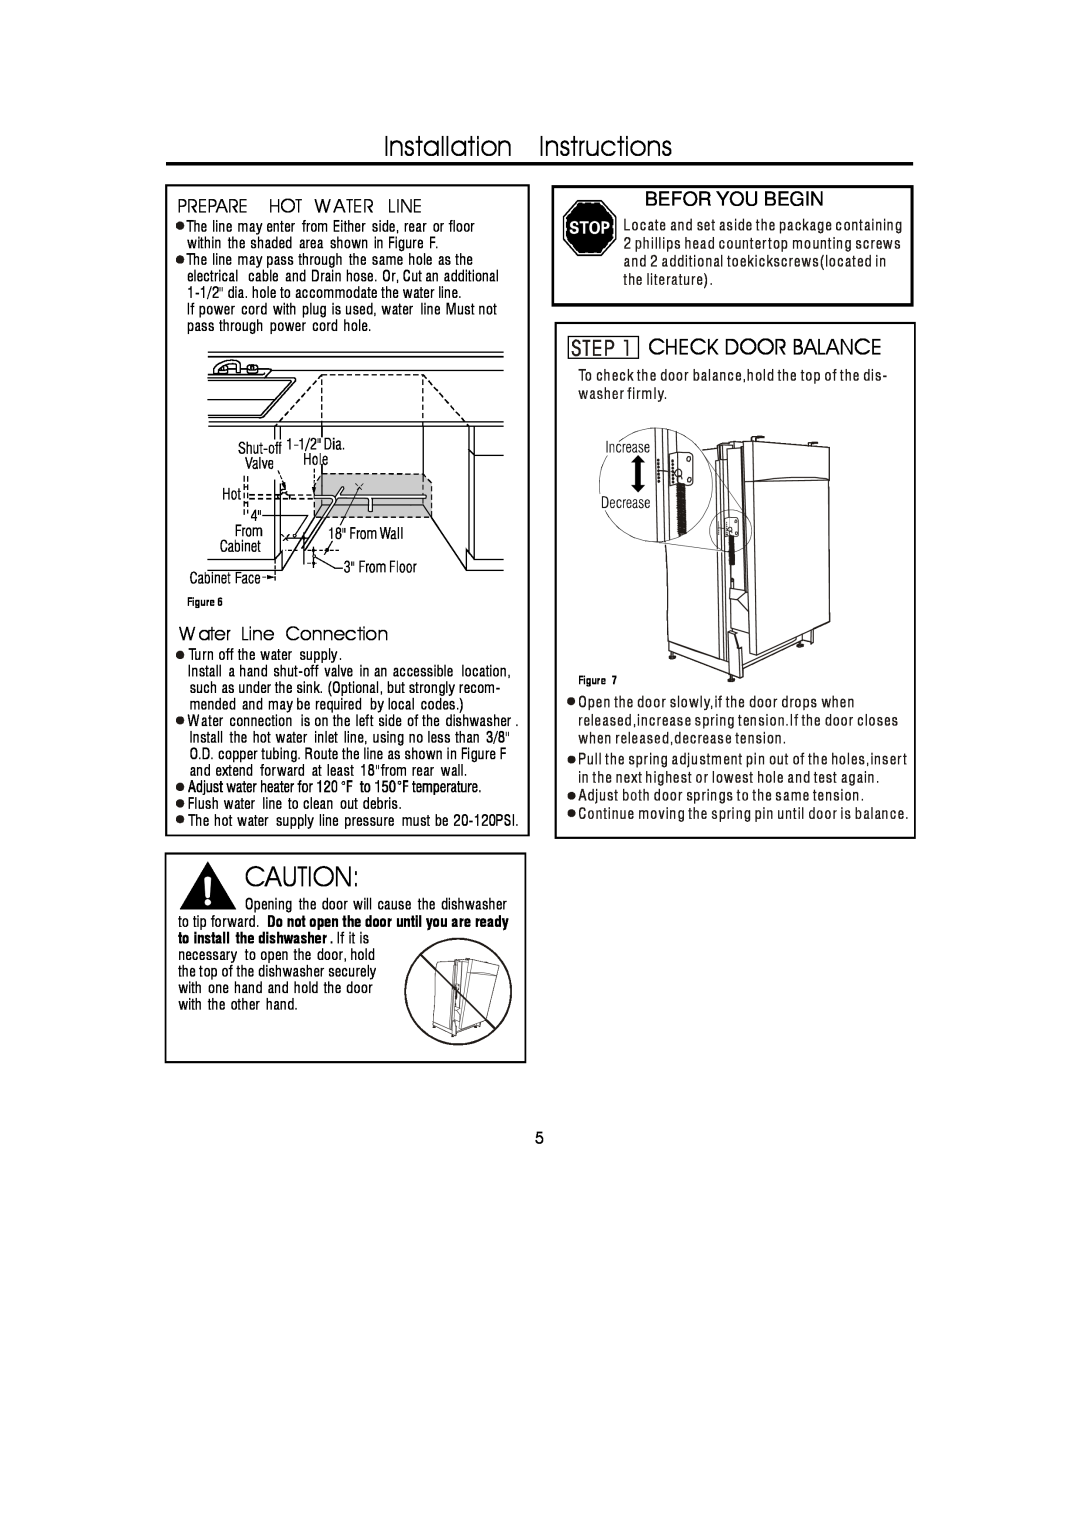 GE 206C1559P148 Installation Instructions, Prepare Hot W Ater Line, Befor You Begin, W ater Line Connection 